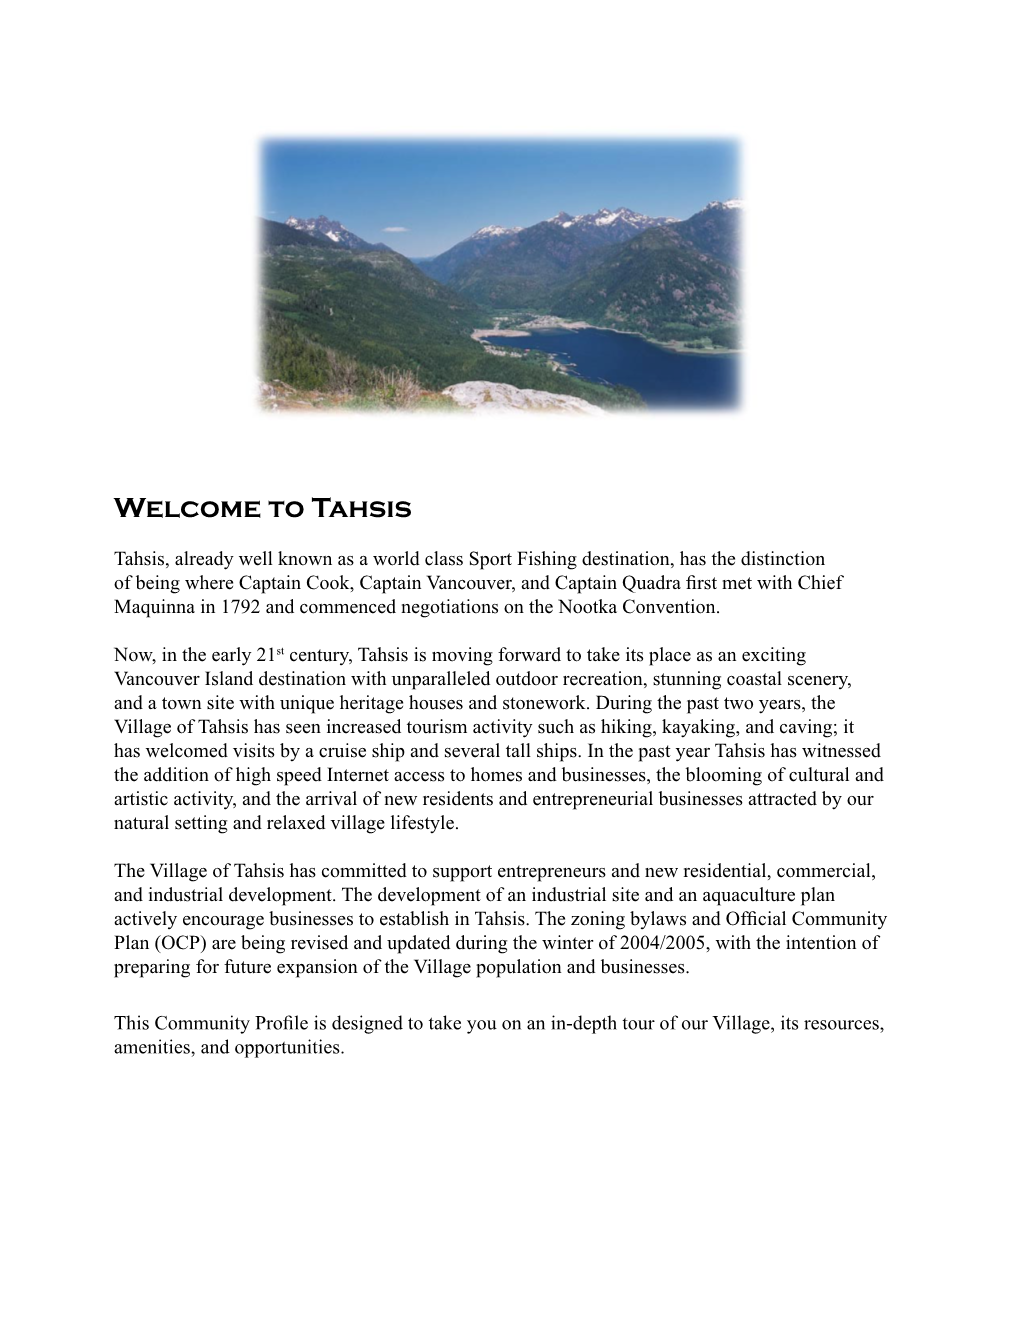 Welcome to Tahsis